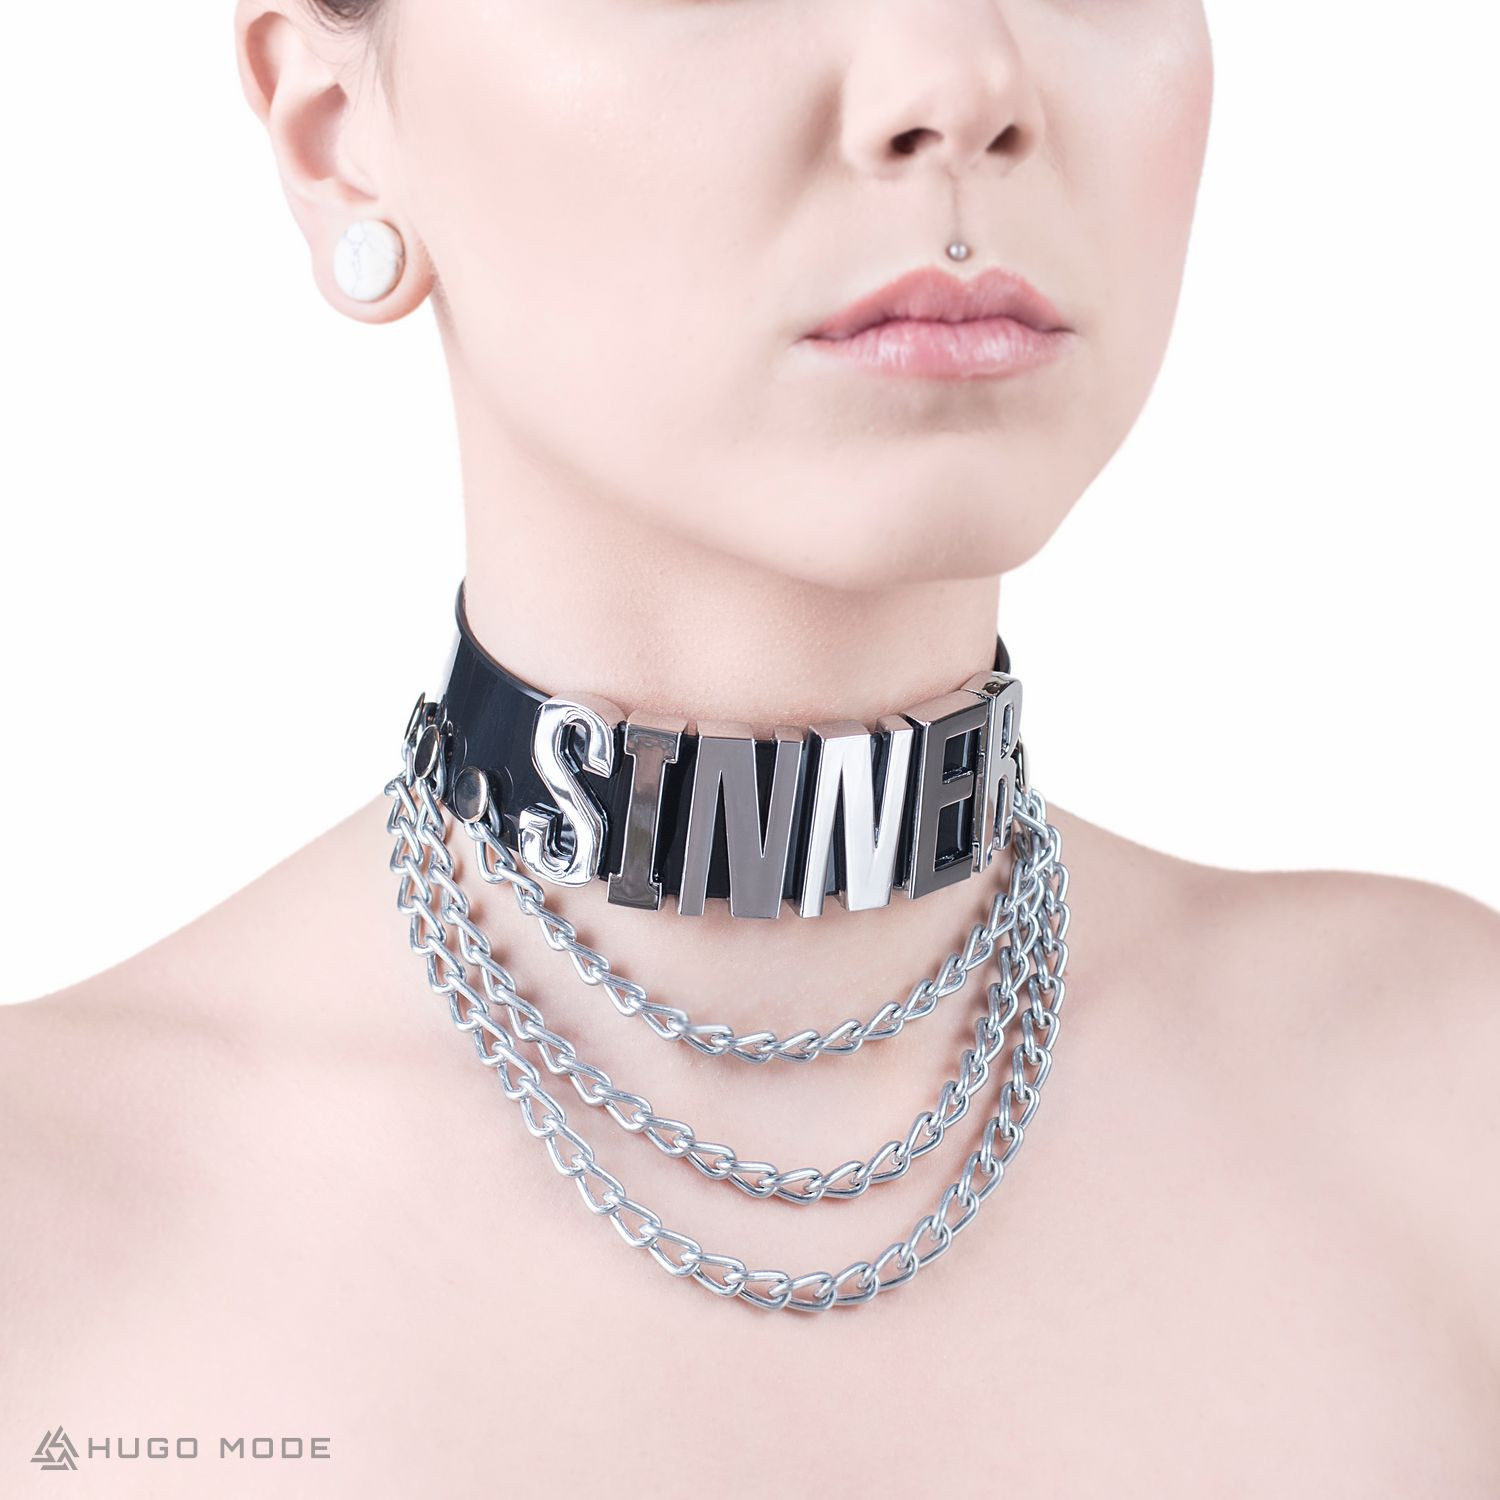 A wide neck choker decorated with chains and an inscription.